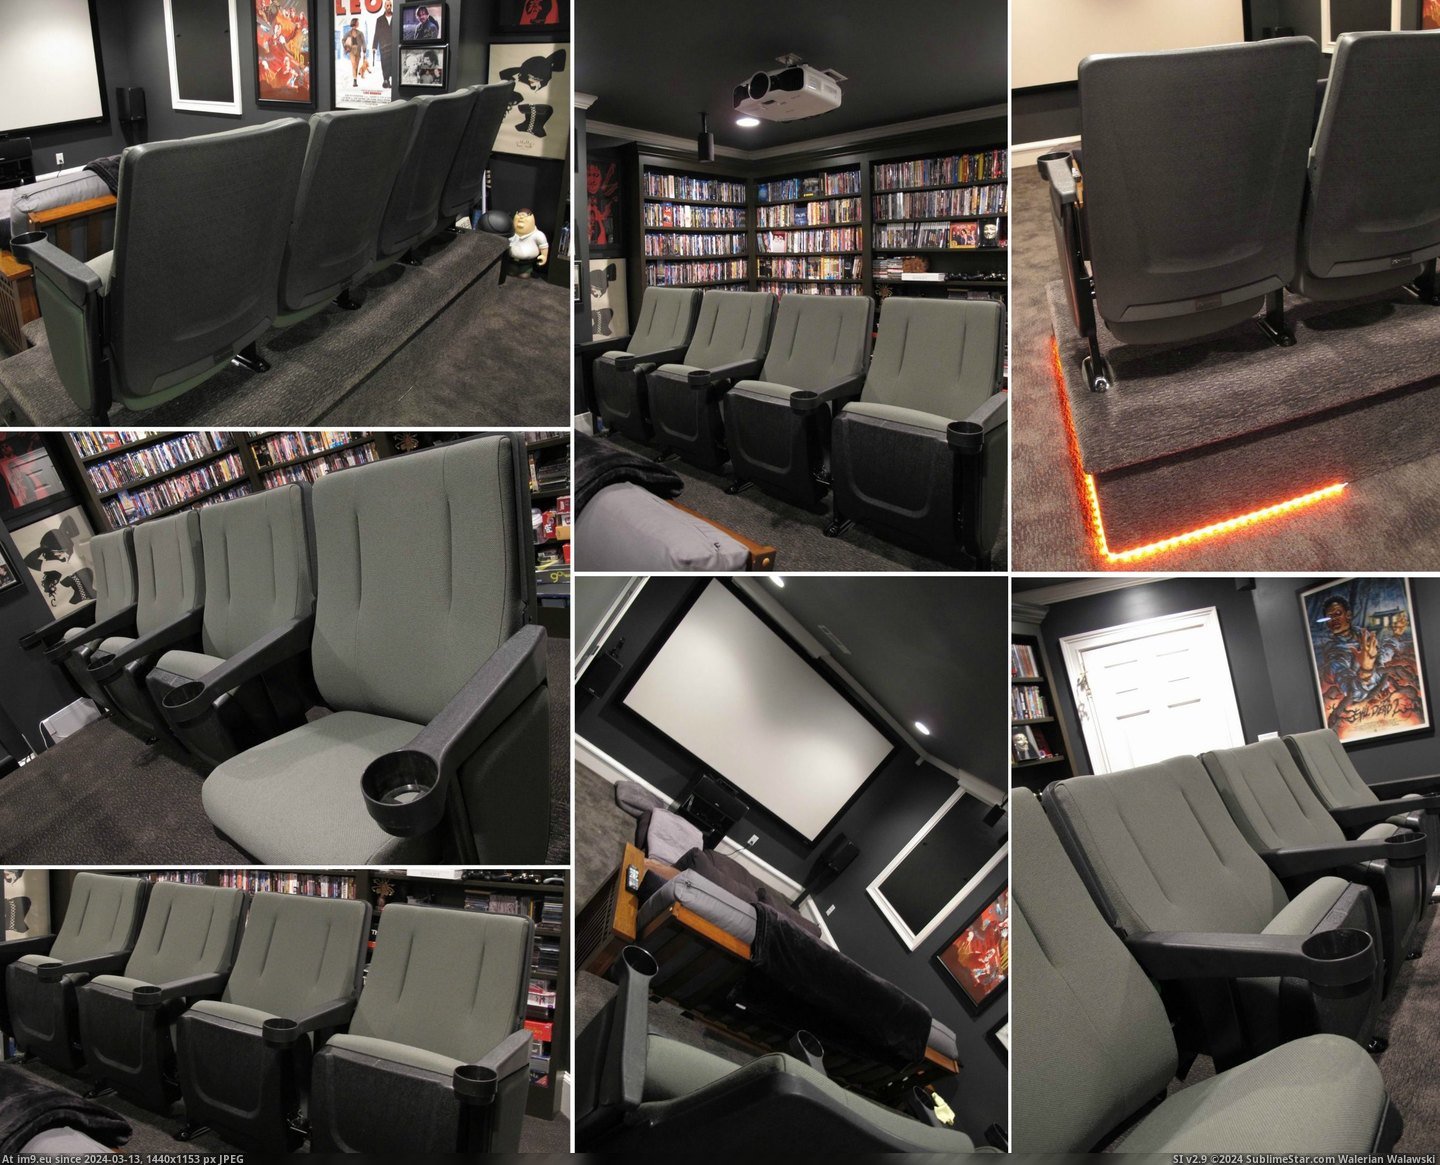 #Gaming #You #Movie #See #Theater #Added #Seats #Room #Wanted #Lot [Gaming] A lot of you wanted to see my movie-gaming room after the theater seats were added. Well...here ya go. :-) Pic. (Image of album My r/GAMING favs))